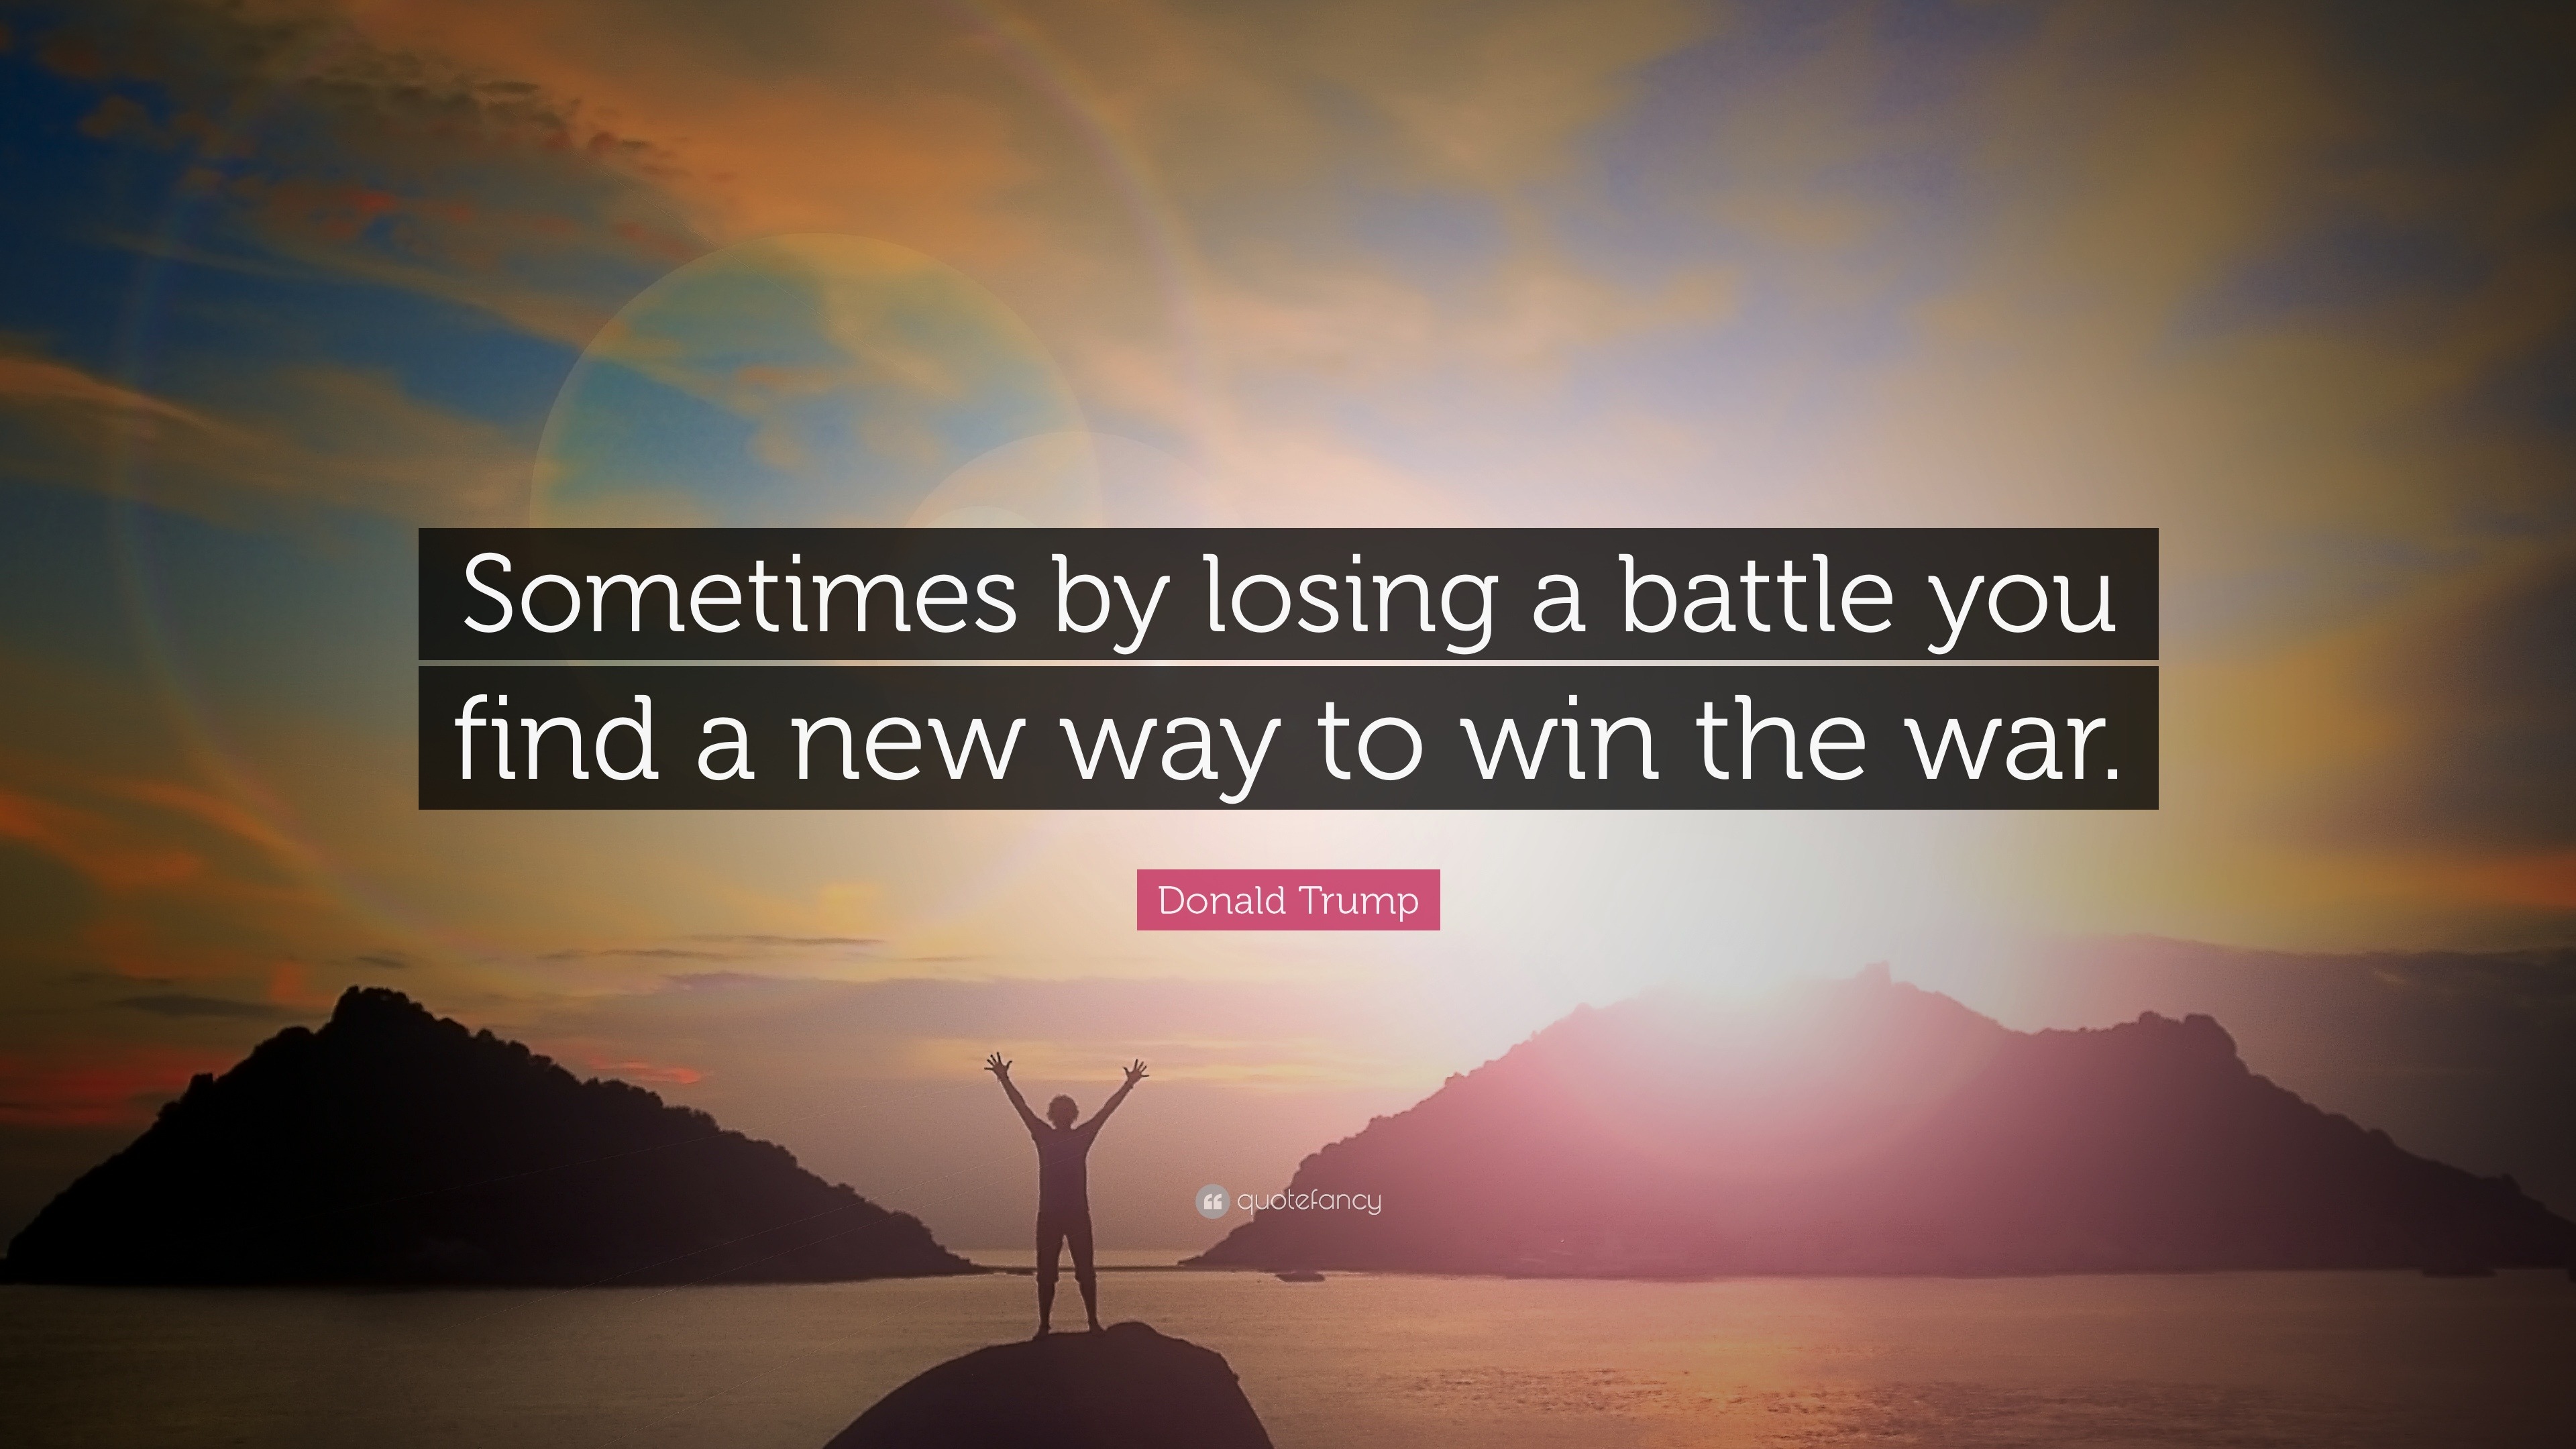 Donald Trump Quote “Sometimes by losing a battle you find